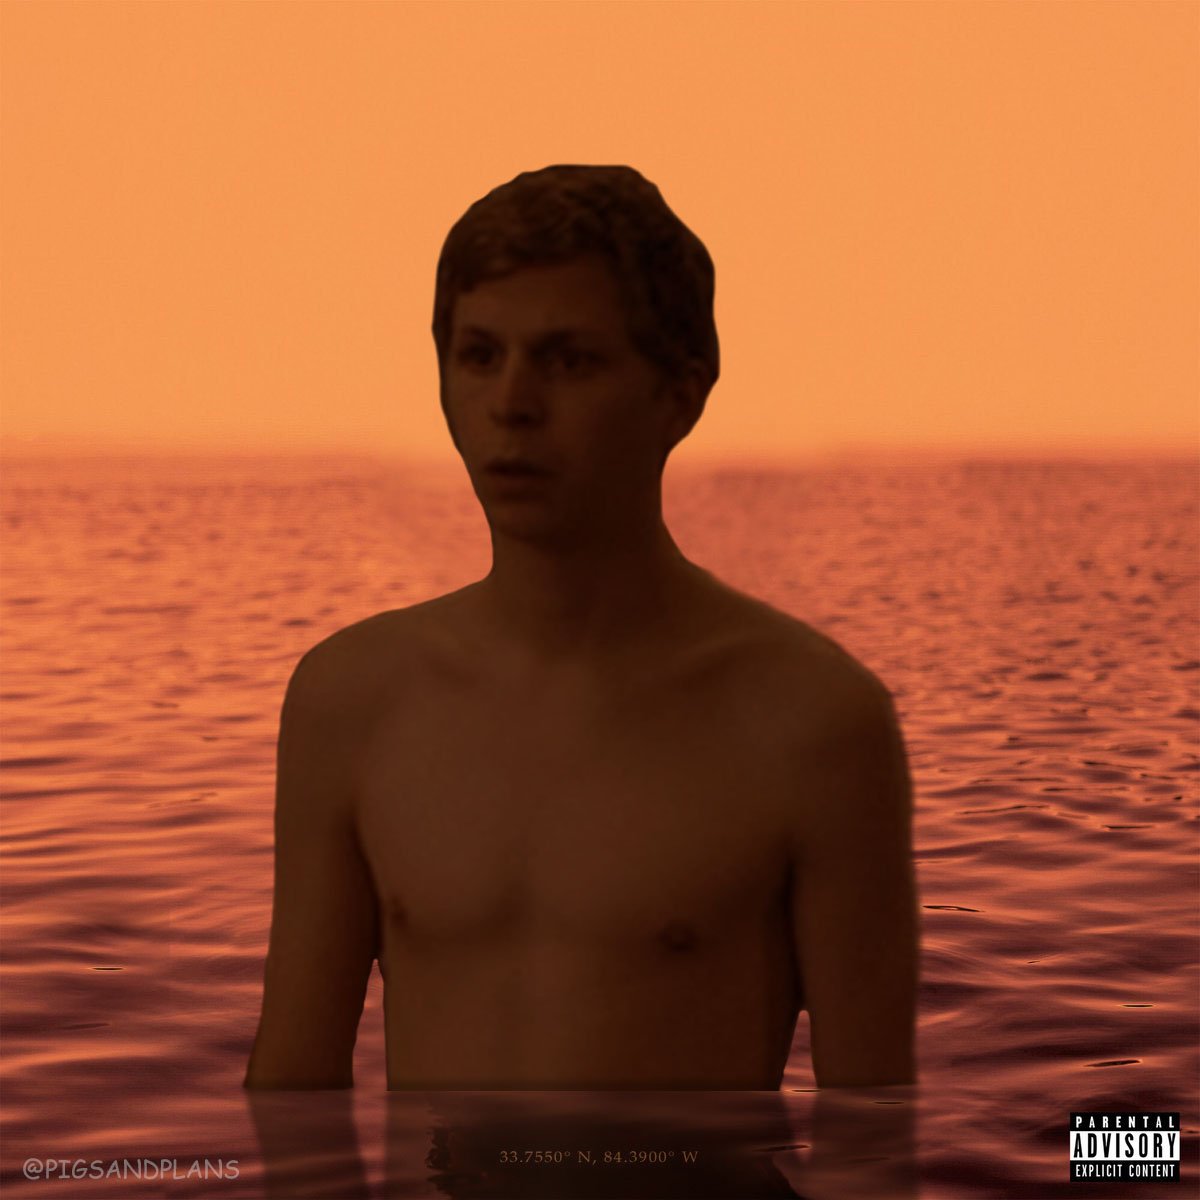 here's lil boat 2 but with michael cera.